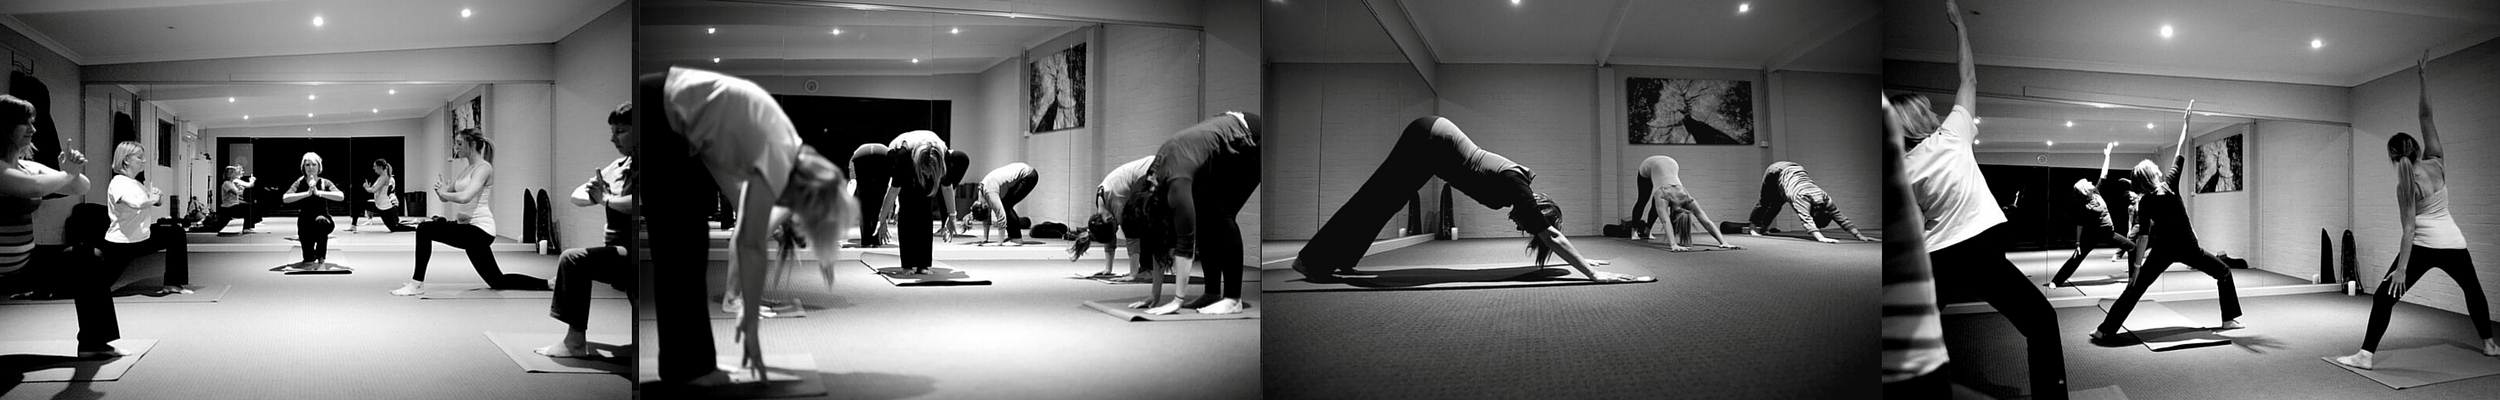 Group Practice - Yoga Freedom, Avondale Heights